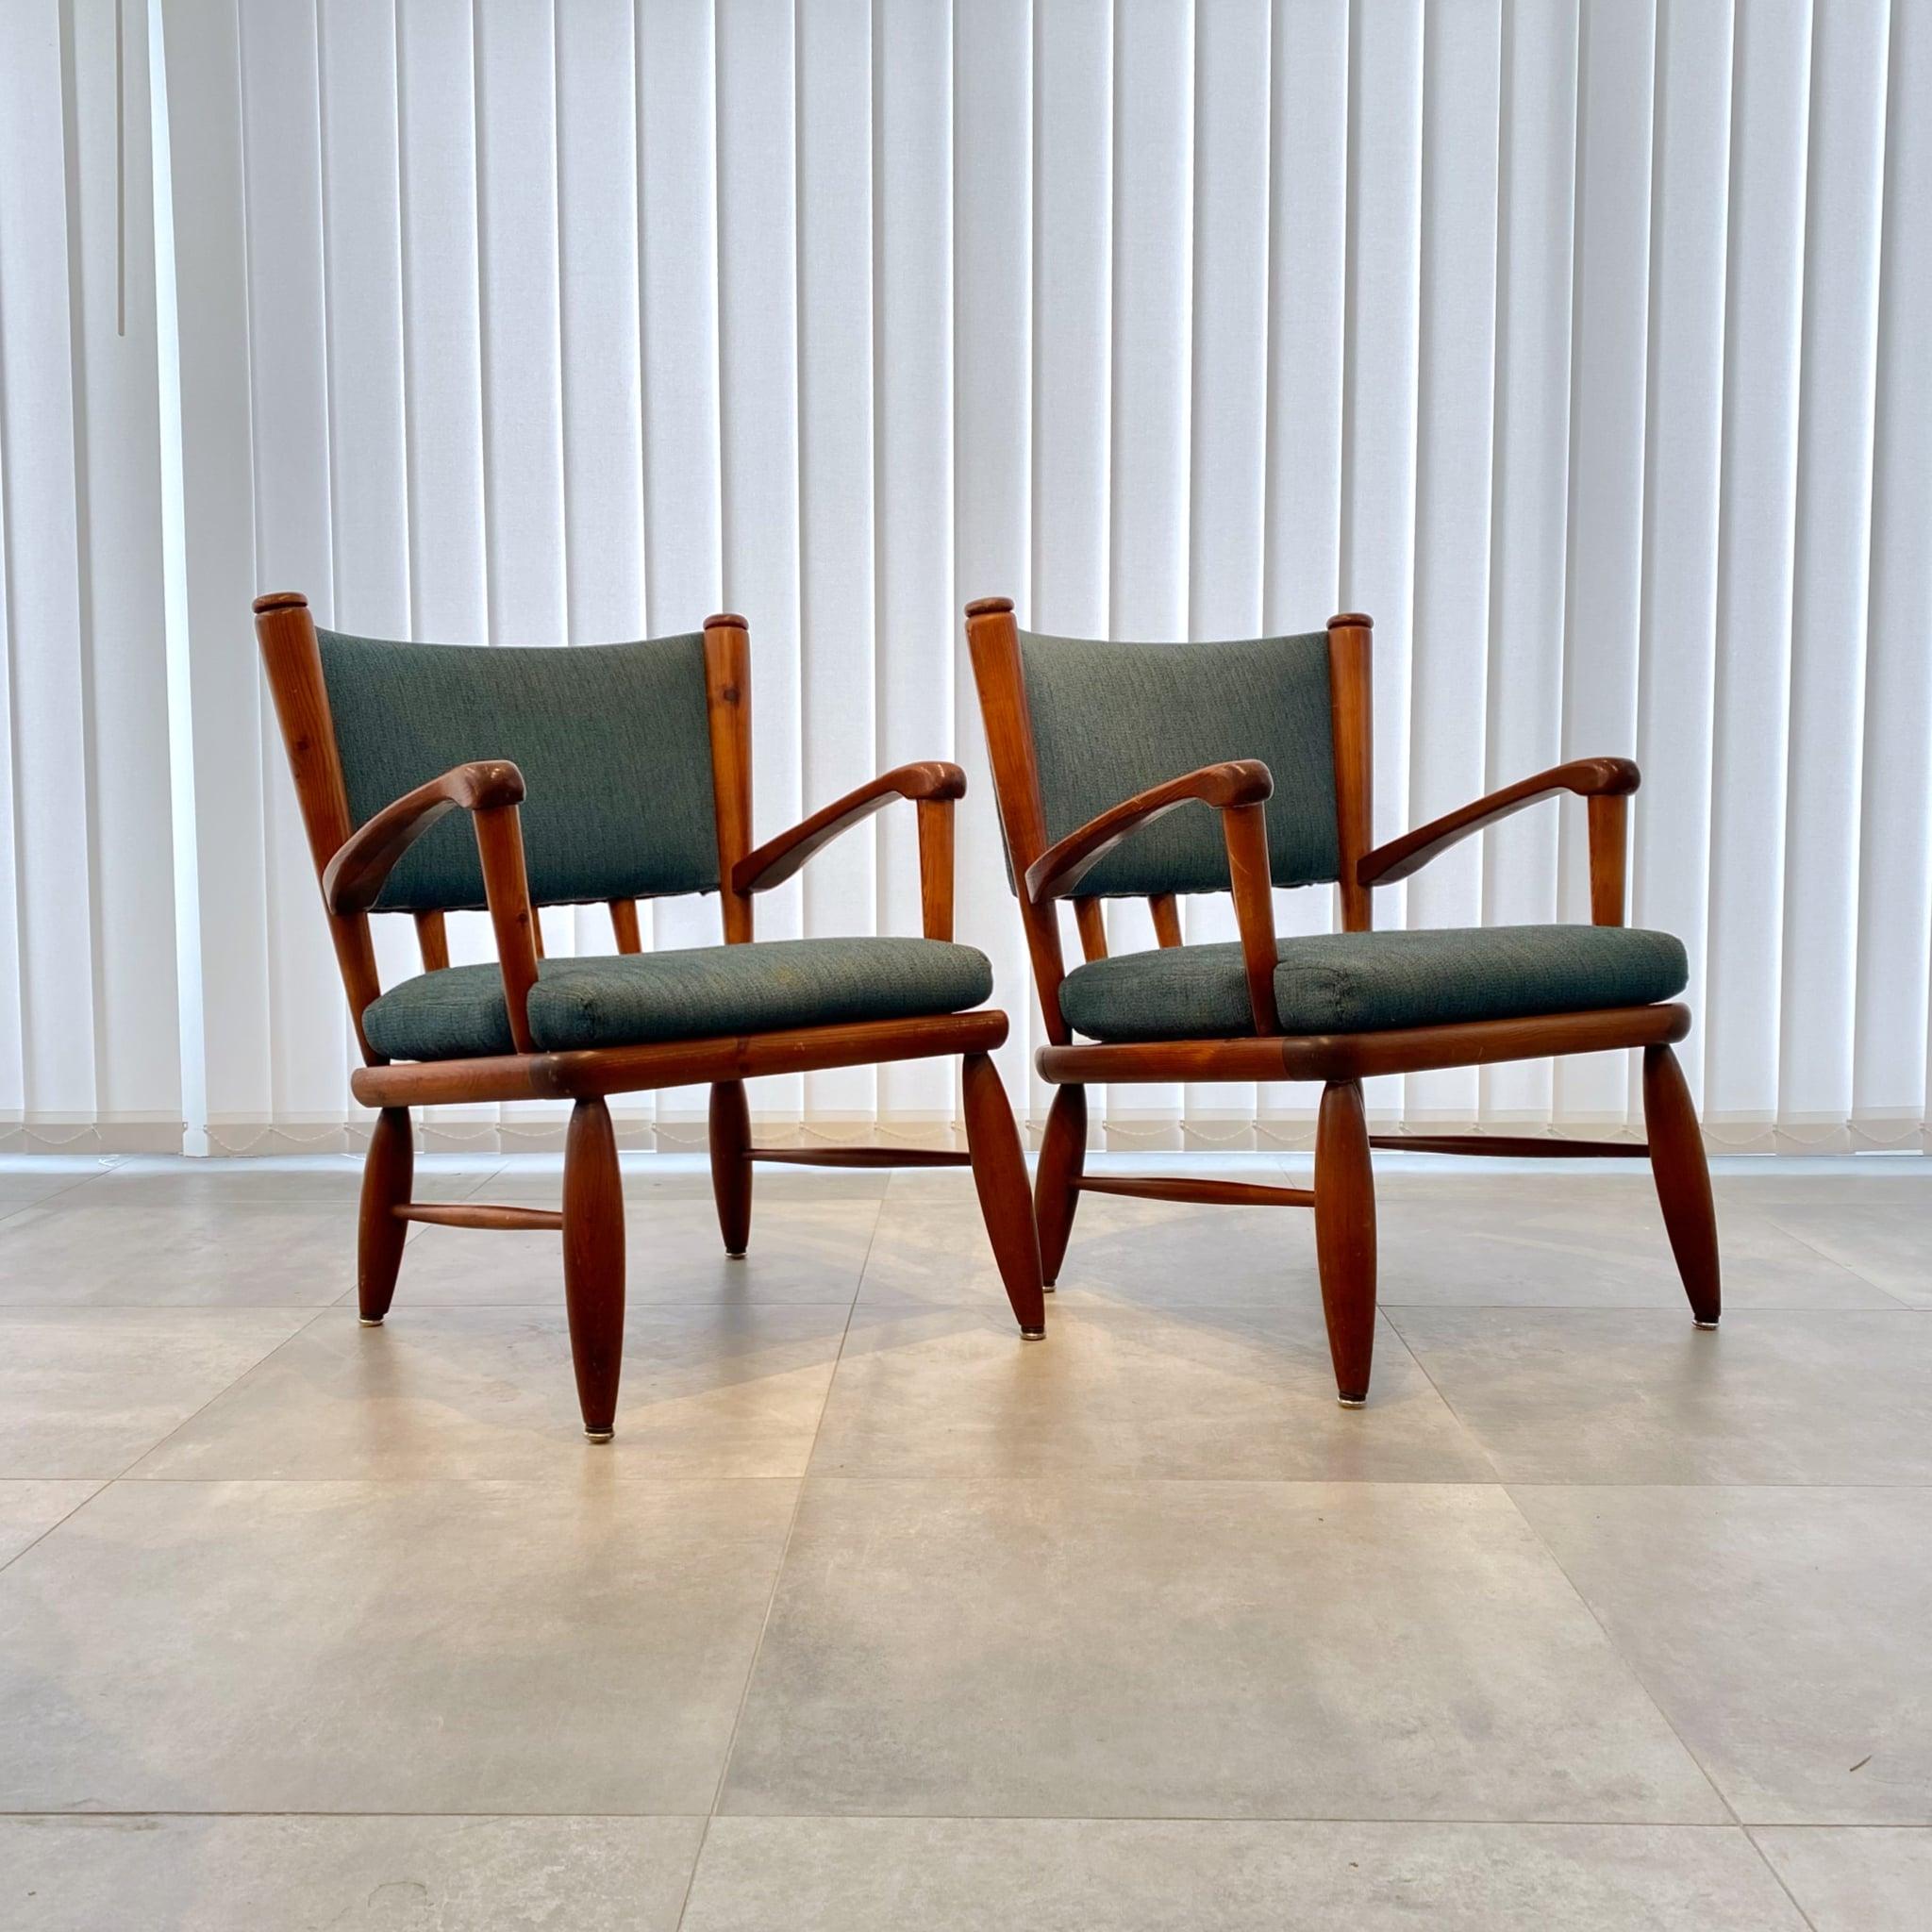 A pair of Säter armchairs designed by Gunnar Göpert in 1948 for the Swedish manufacturer Göperts Industri, Jönköping. Made from solid pine with original blue fabric. The model was showcased as news in a full-page ad in the design magazine Form in